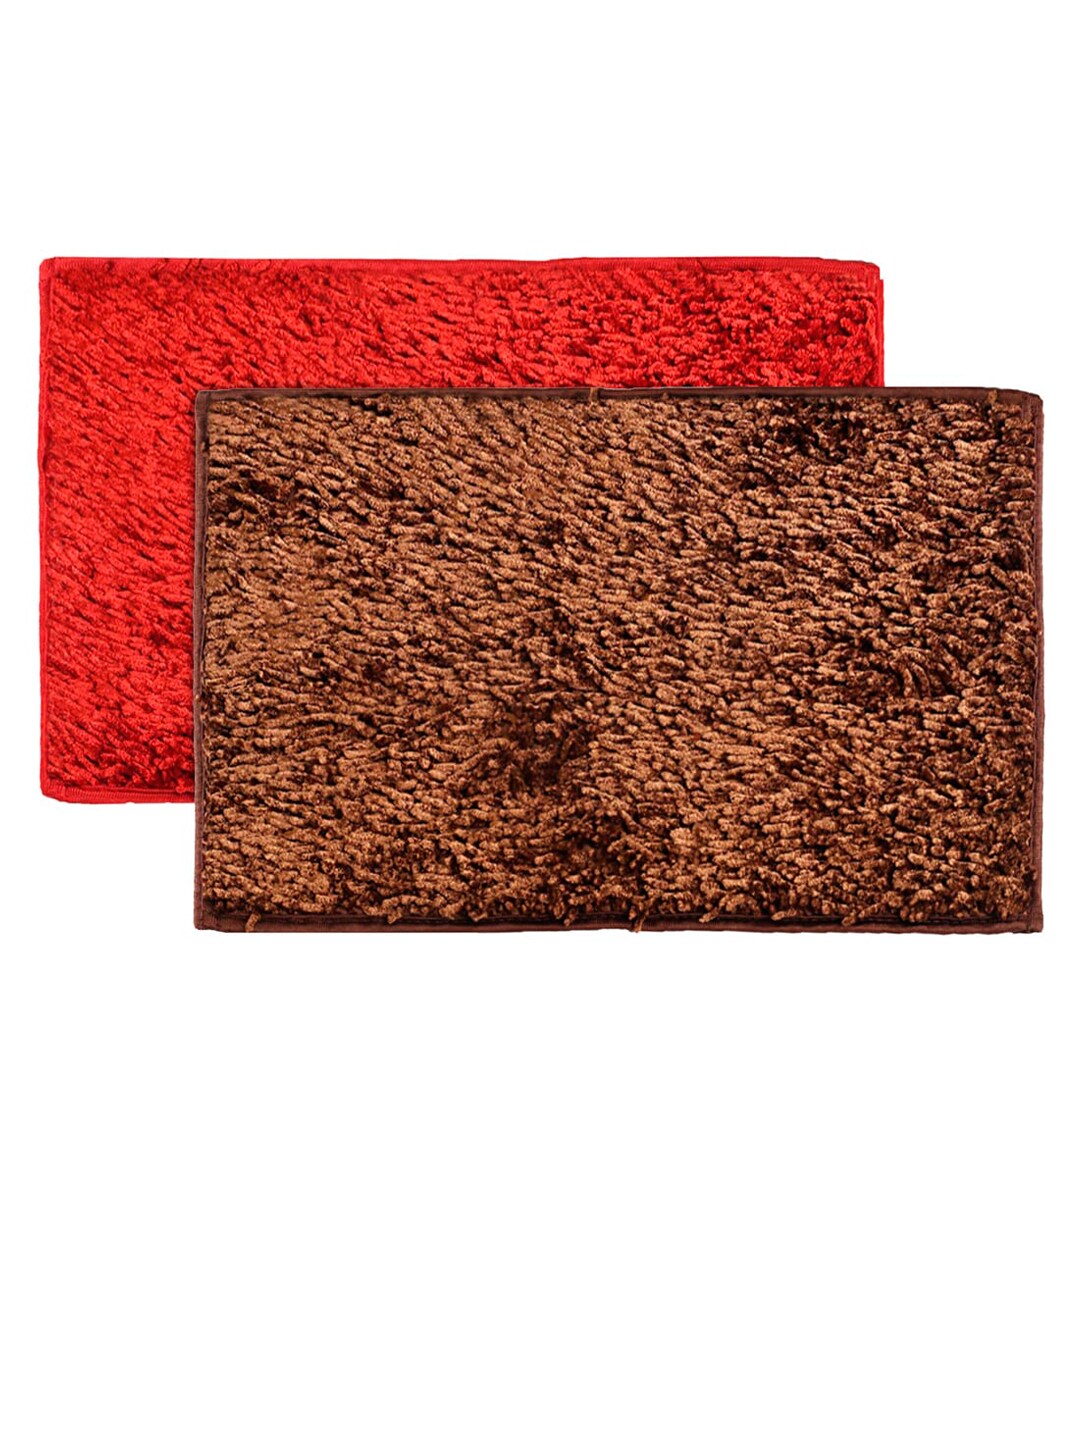 Kuber Industries Set Of 2 Red & Brown Solid Shaggy Anti-Skid Doormats Price in India